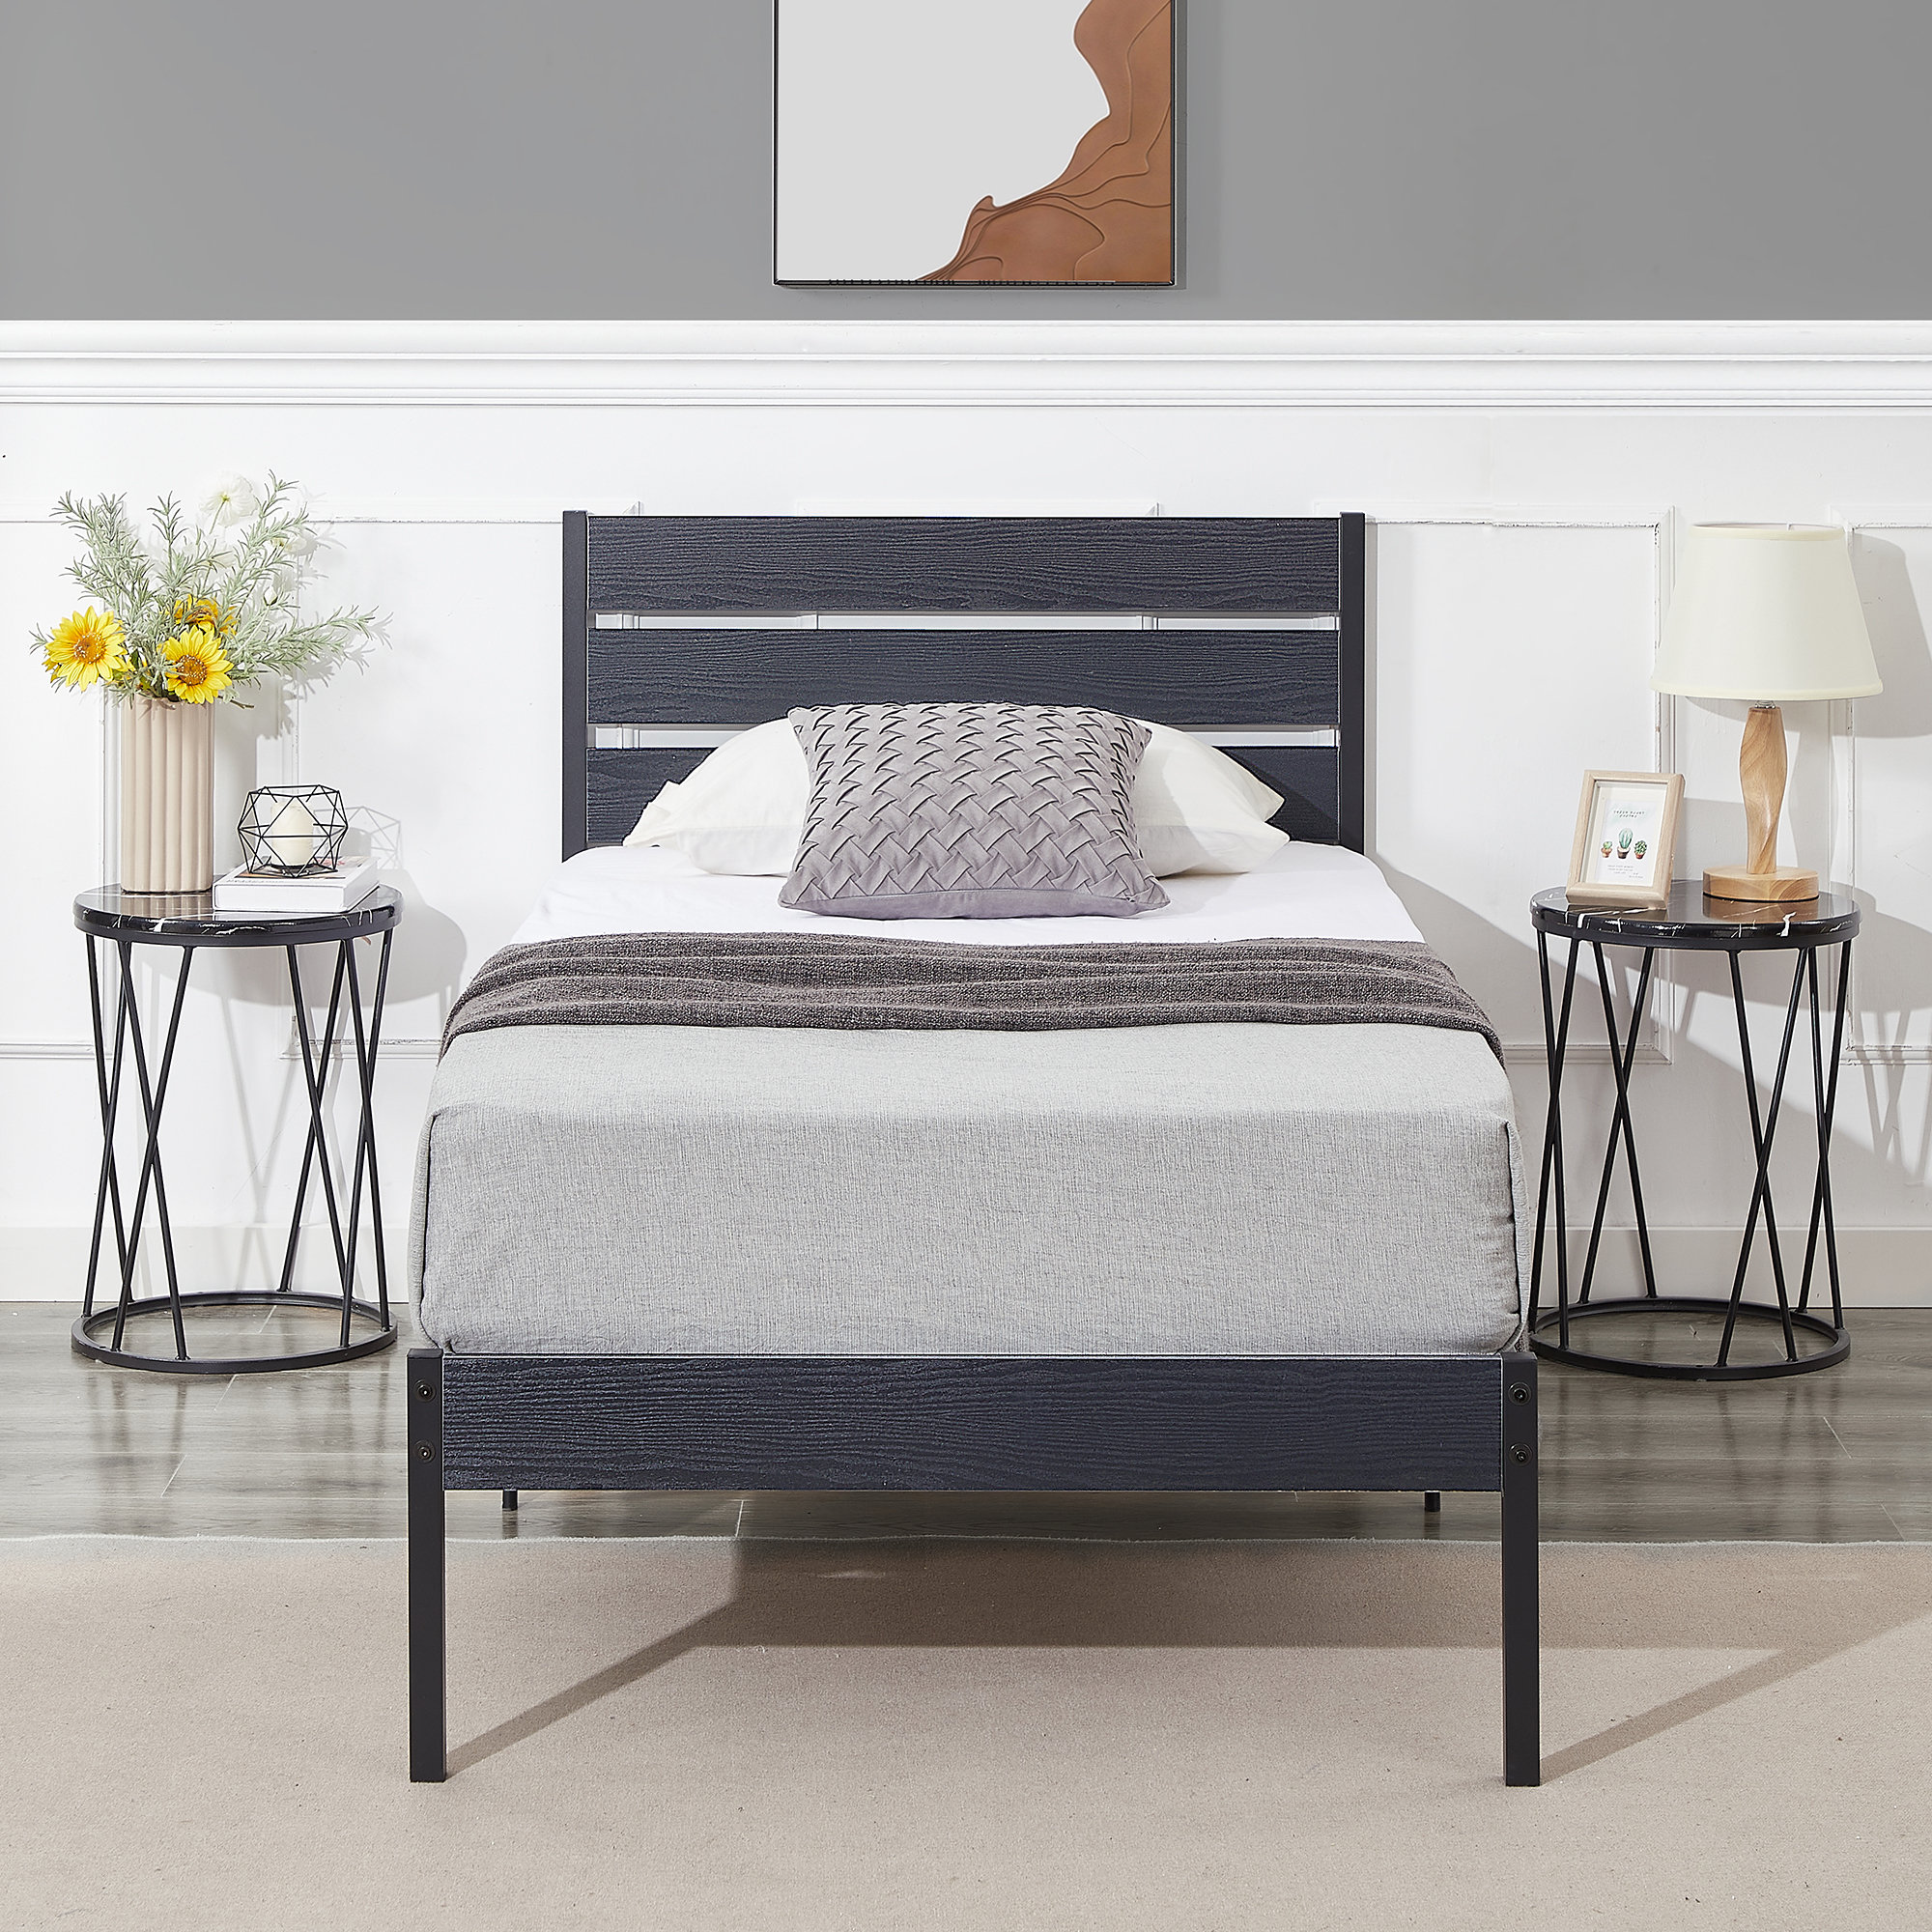 Kempst 42.5 Bed Frame with Rustic Vintage Wood Headboard